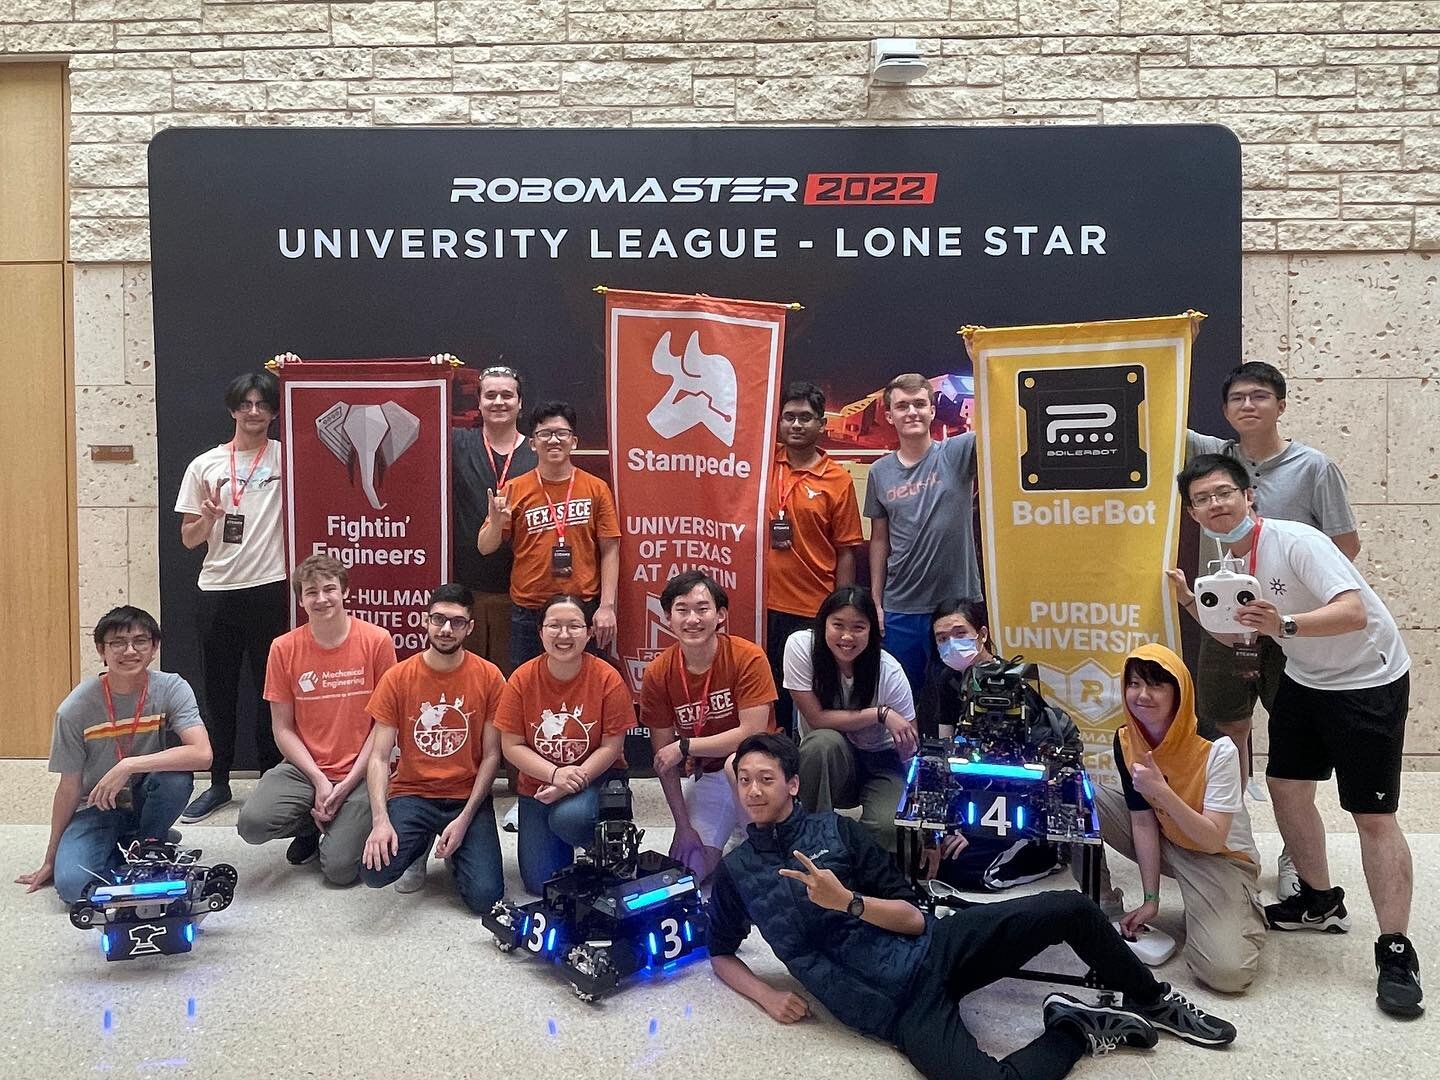 We have a huge announcement: We placed 4th in the Robomasters NA League! Big thanks to UT Austin (@ut_ieee_ras) and Rose-Hulman (@rhit_robomasters) teams for forming a coalition with us. Very proud of this team! 

Special shoutout to our president @e